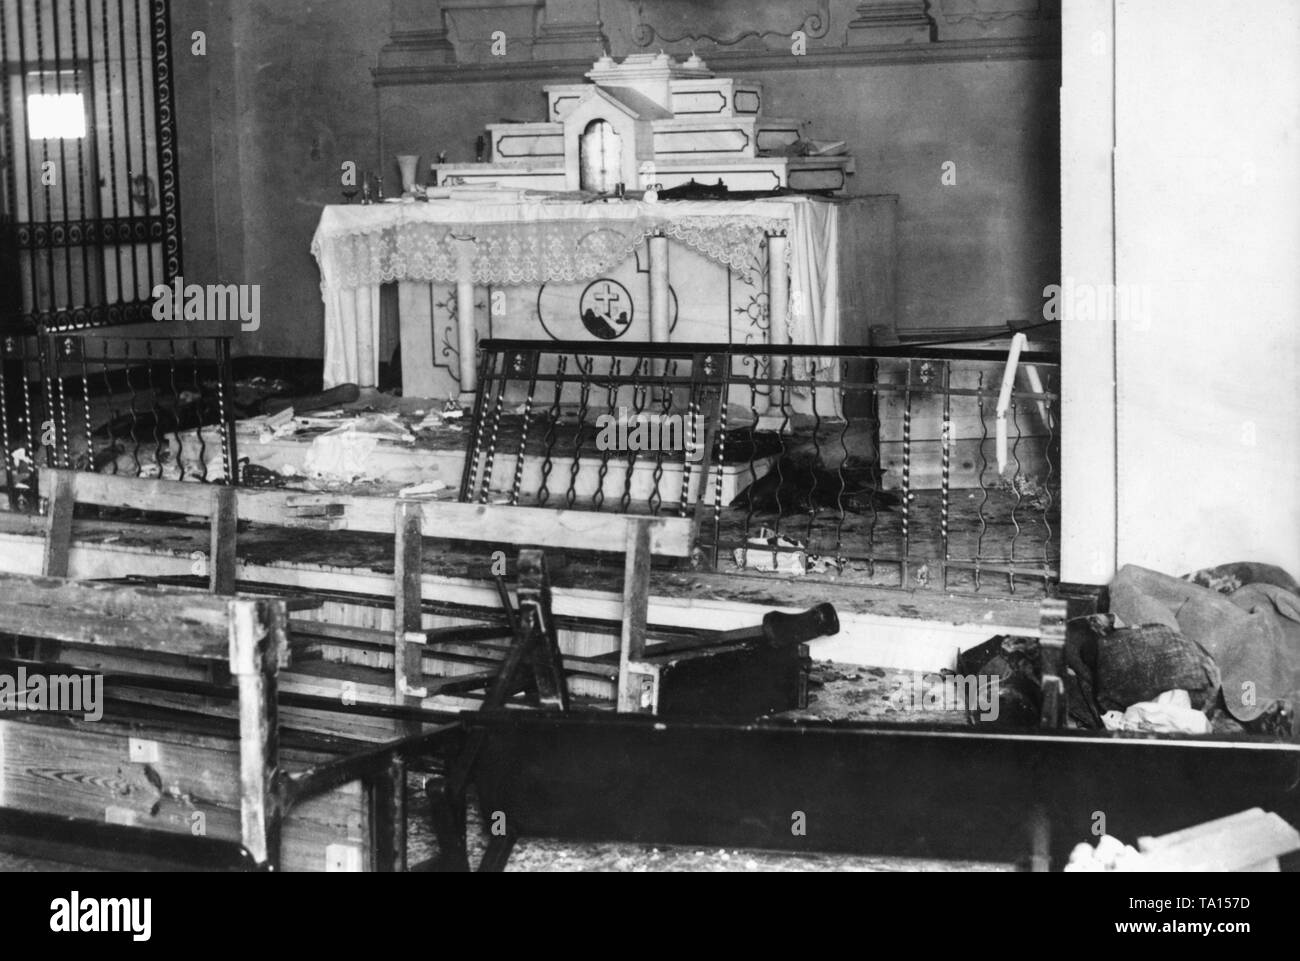 Destroyed altar of a church in Madrid in March, 1936. Even before the outbreak of the Spanish Civil War in July, 1936, there were riots and demonstrations in Spain. The rage of individual Communists and other leftist supporters was directed against churches, Catholic priests or the fascist monarchist newspaper 'La Nacion'. Stock Photo